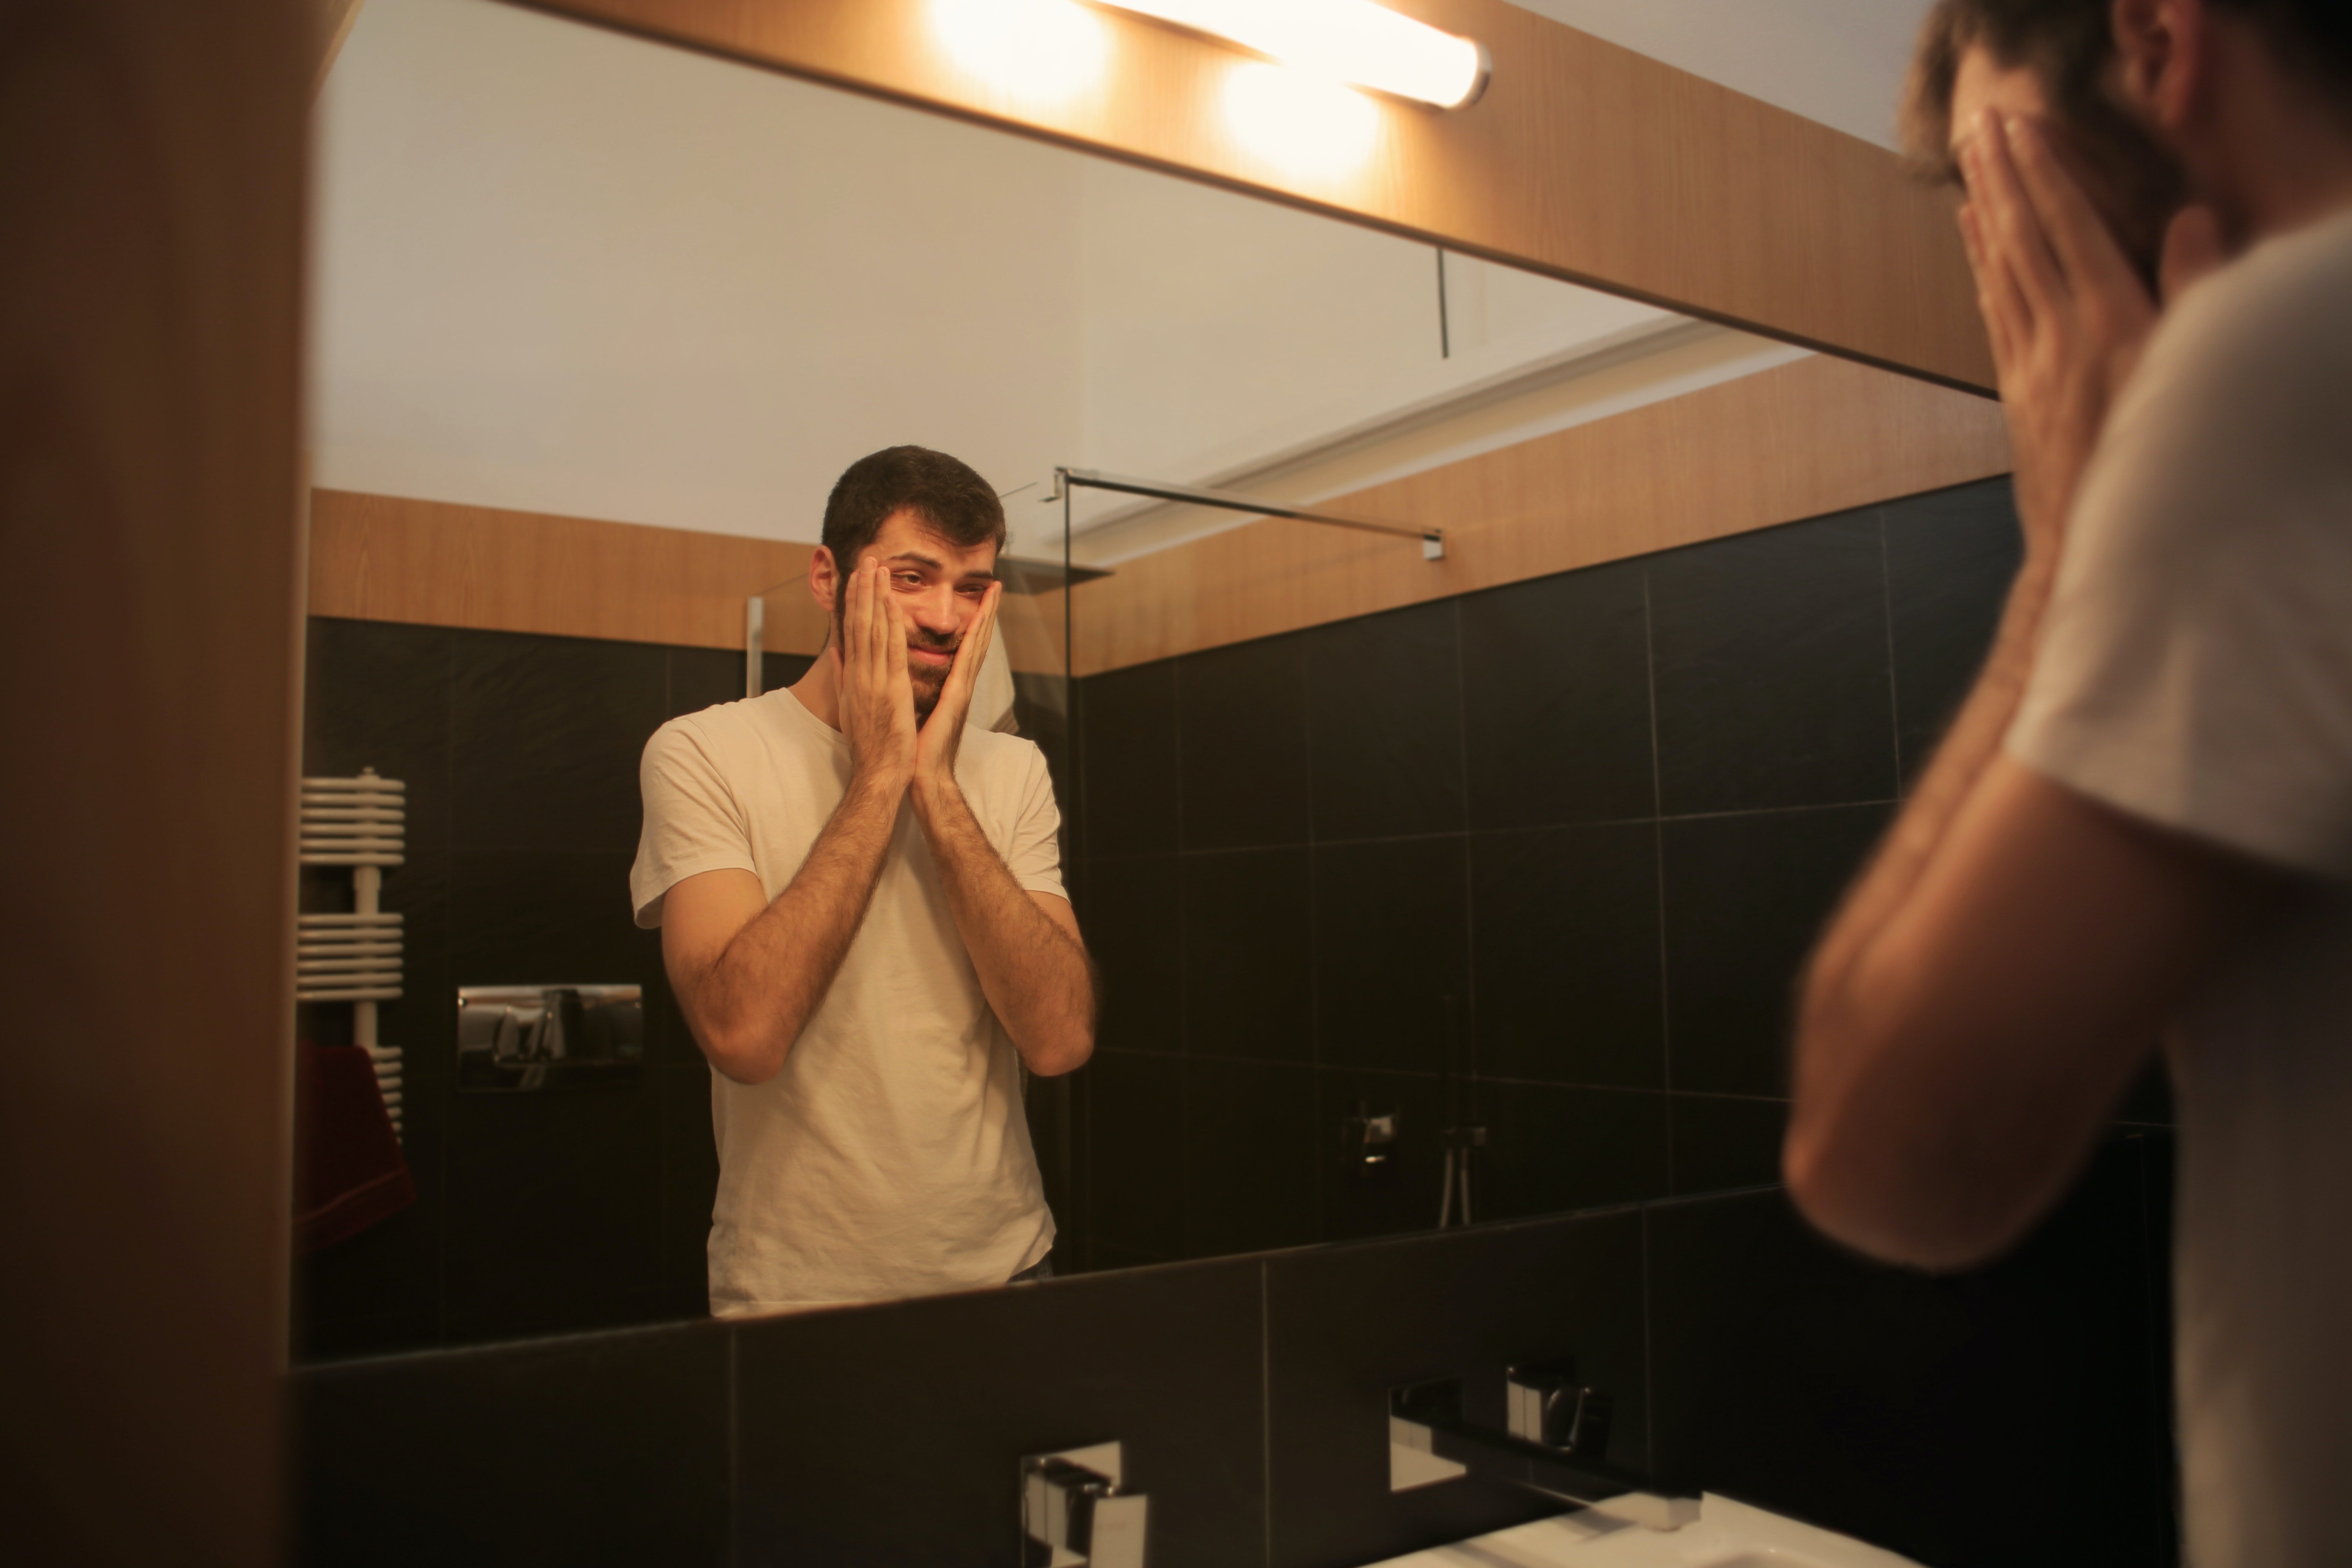 Pictured - A man looking in the mirror in the bathroom | Source: Pexels 